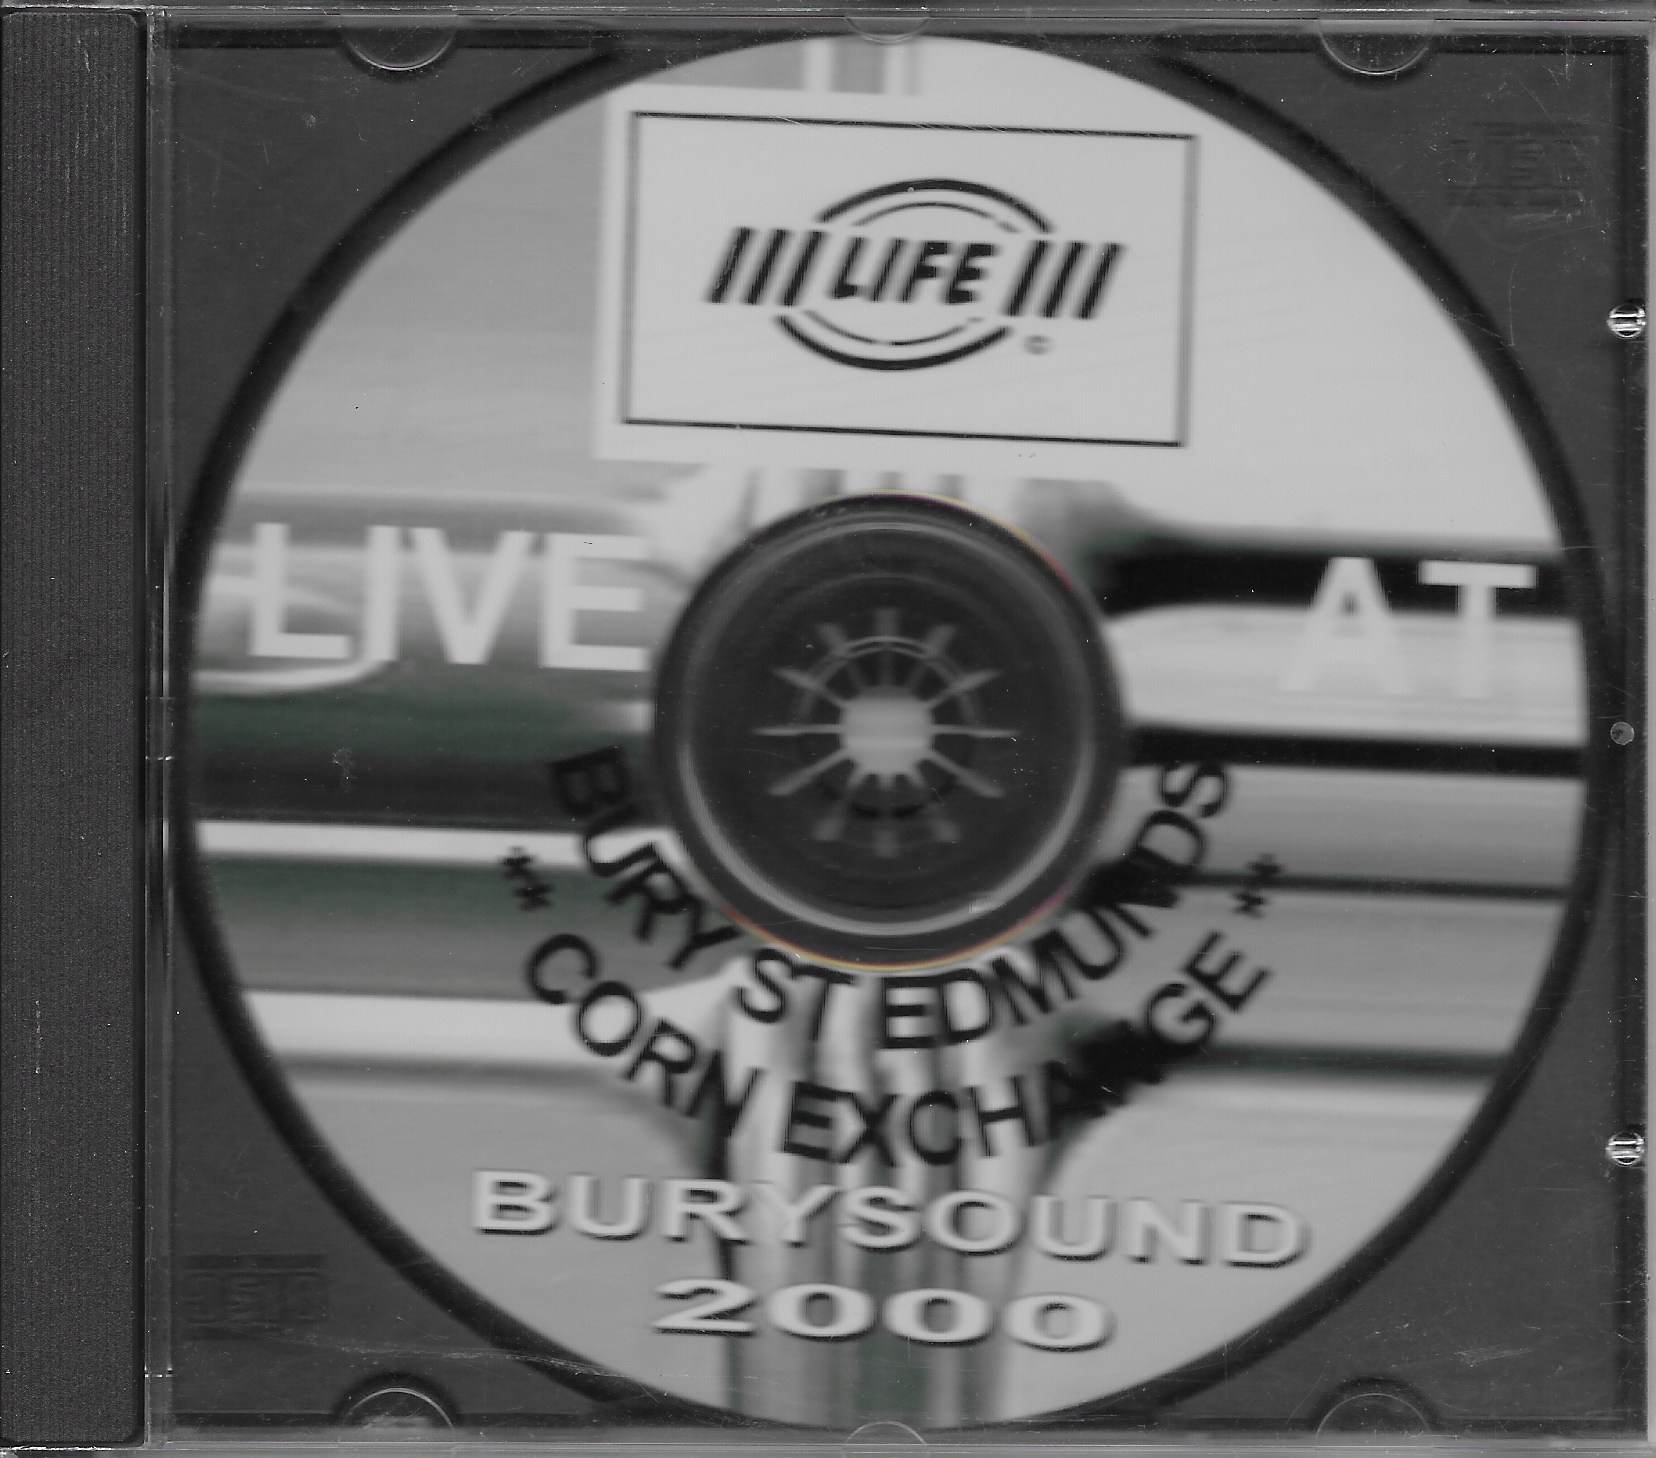 Picture of LIFE_LIVE Live at Bury Sound 2000 by artist Life 